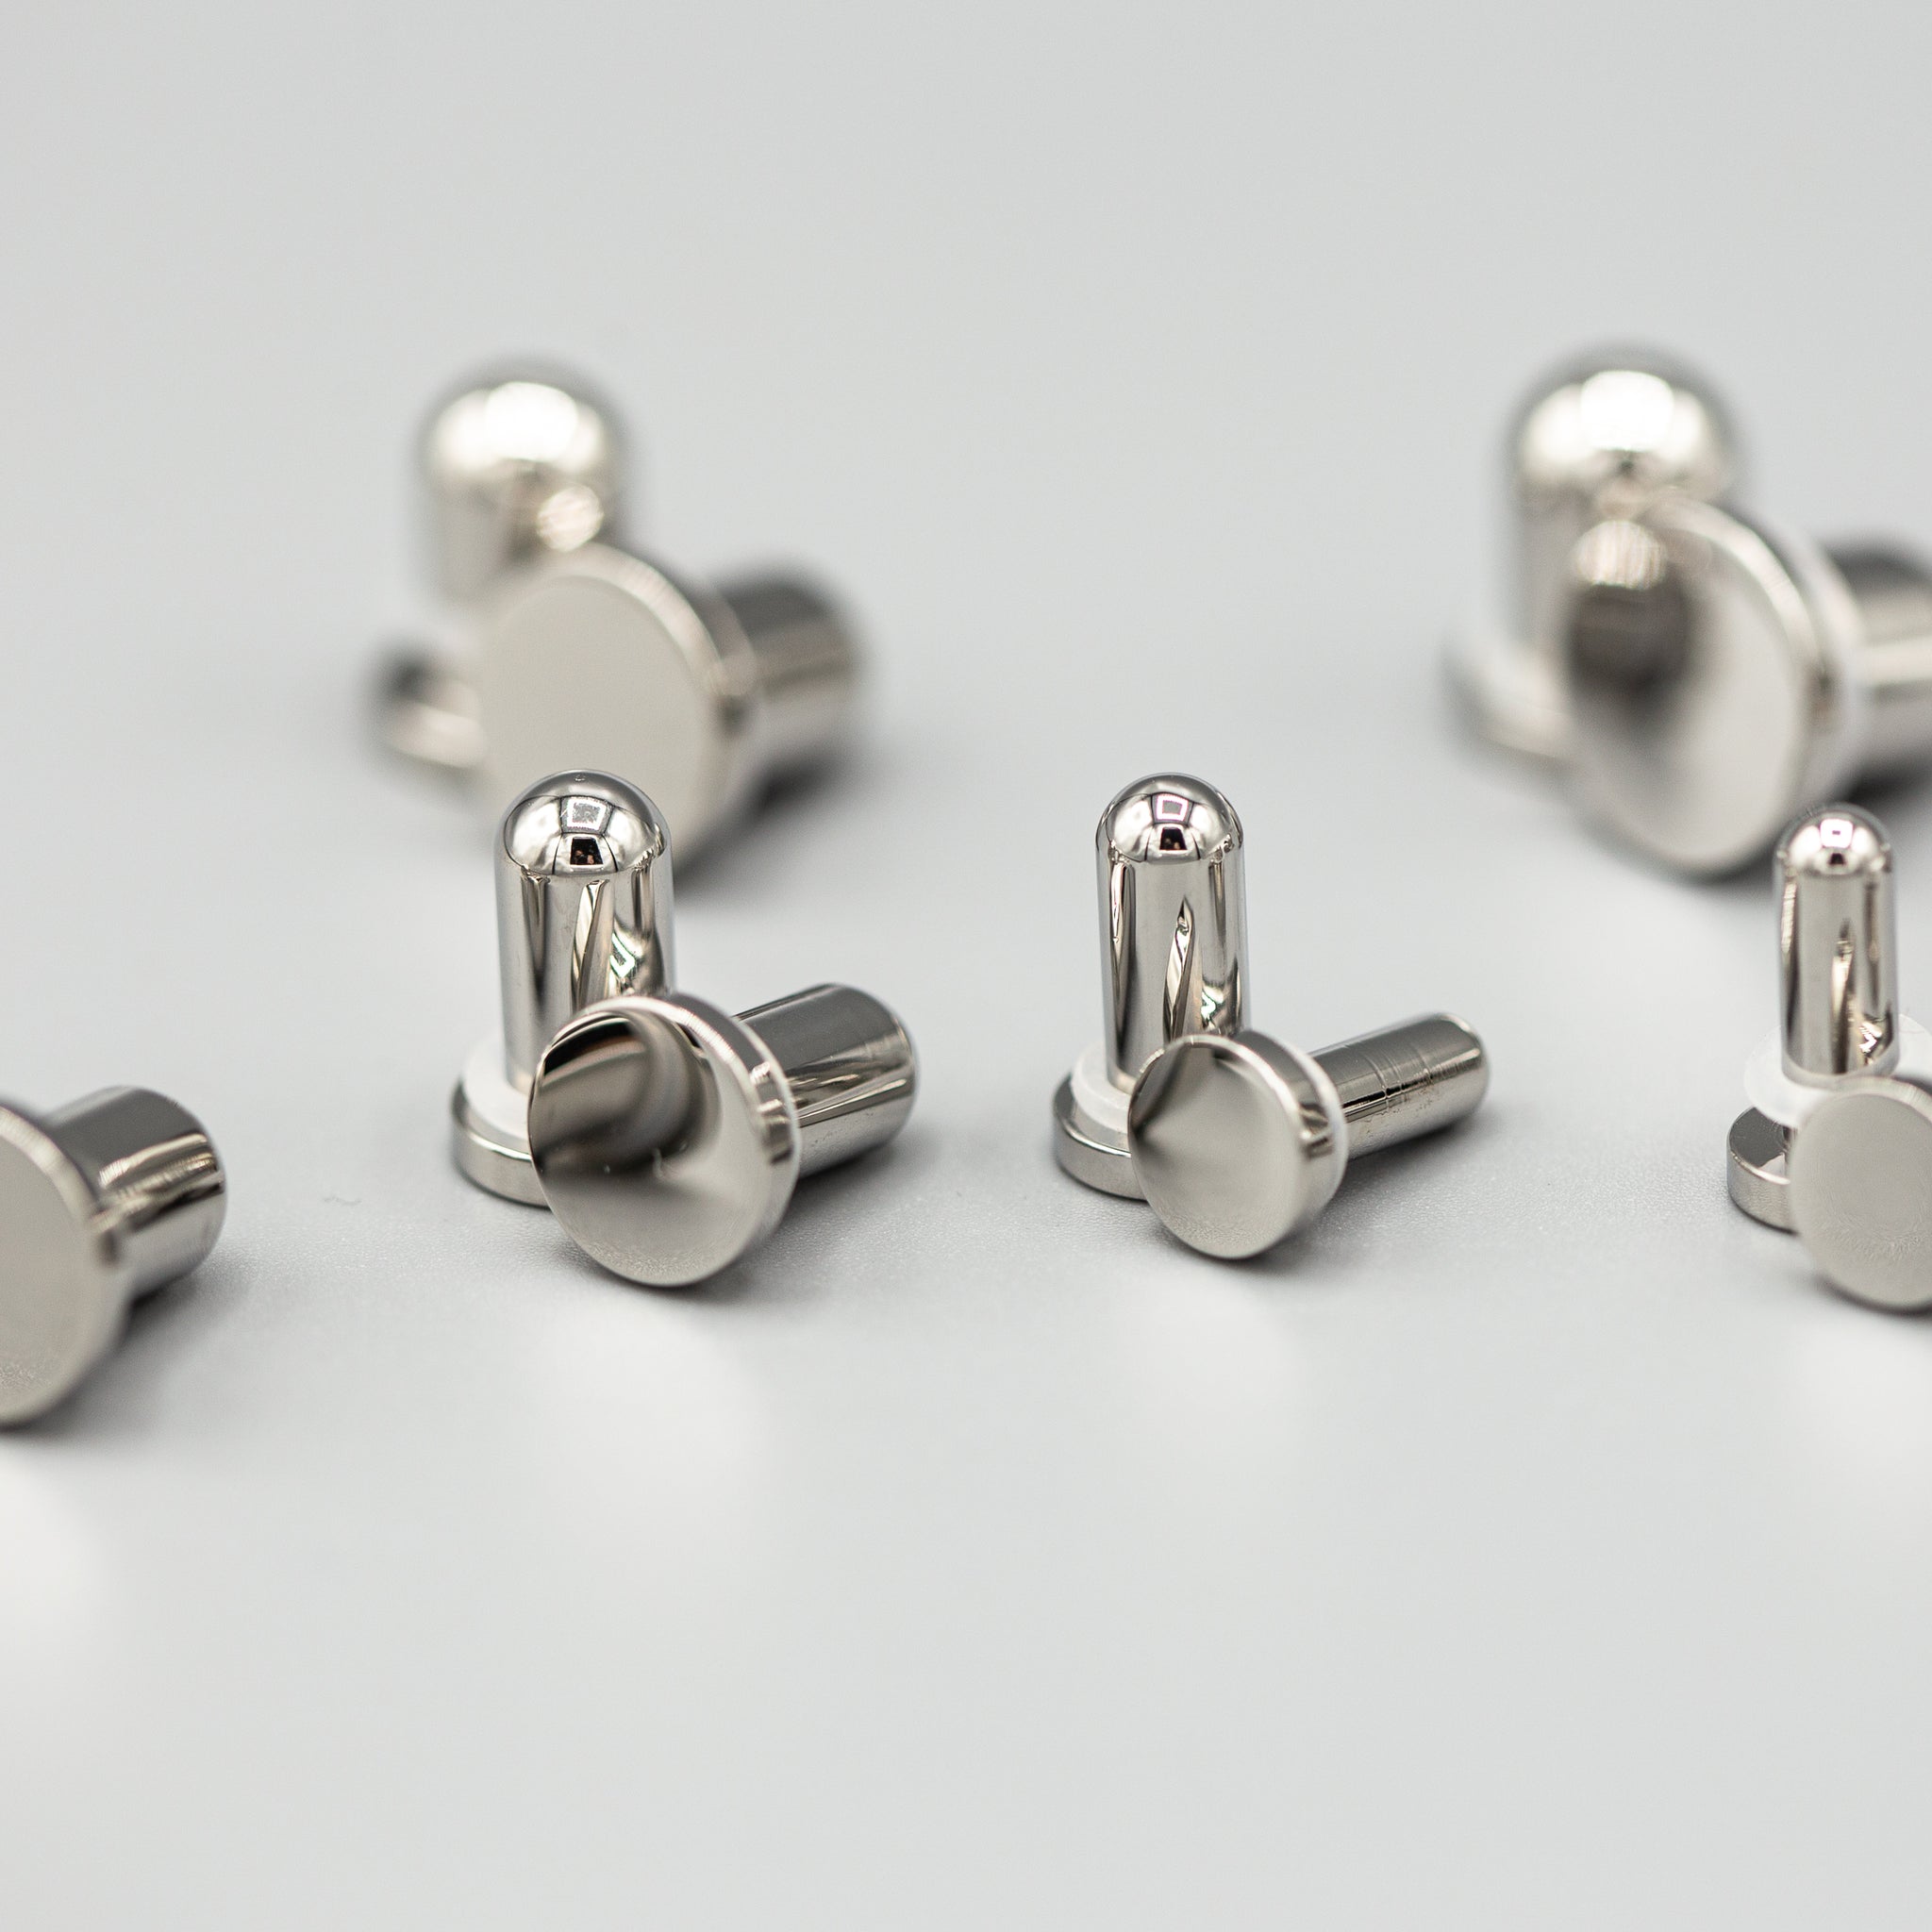 316L Stainless Steel Single Flared Plug Pair:  1mm to 10mm for Dead Stretching or Daily Wear - 70 Knots